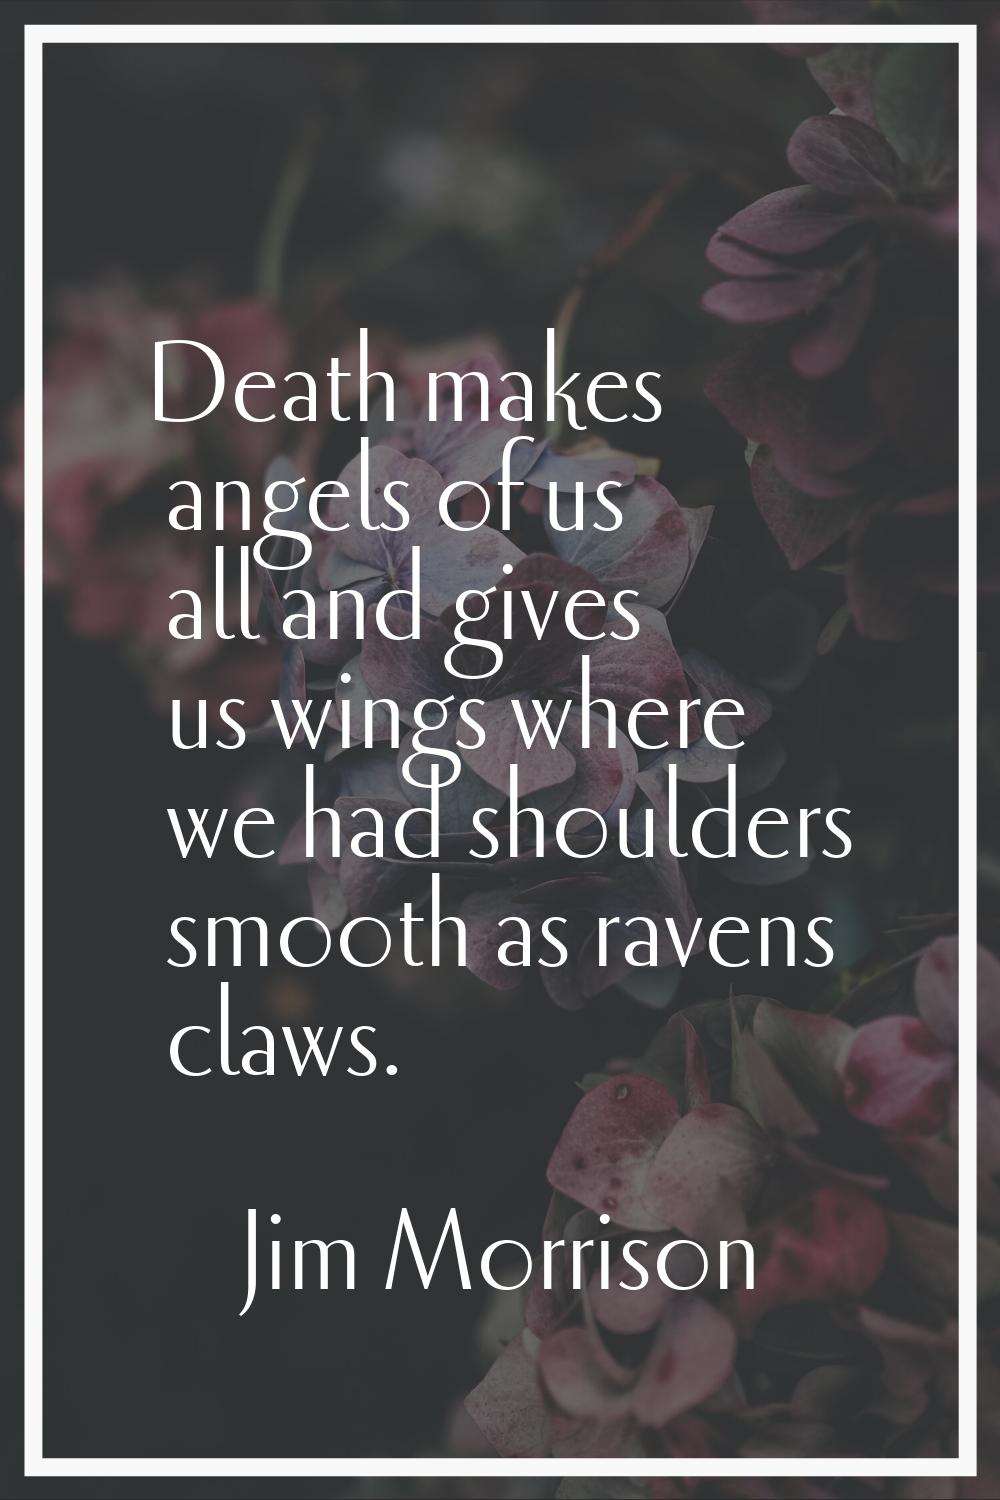 Death makes angels of us all and gives us wings where we had shoulders smooth as ravens claws.